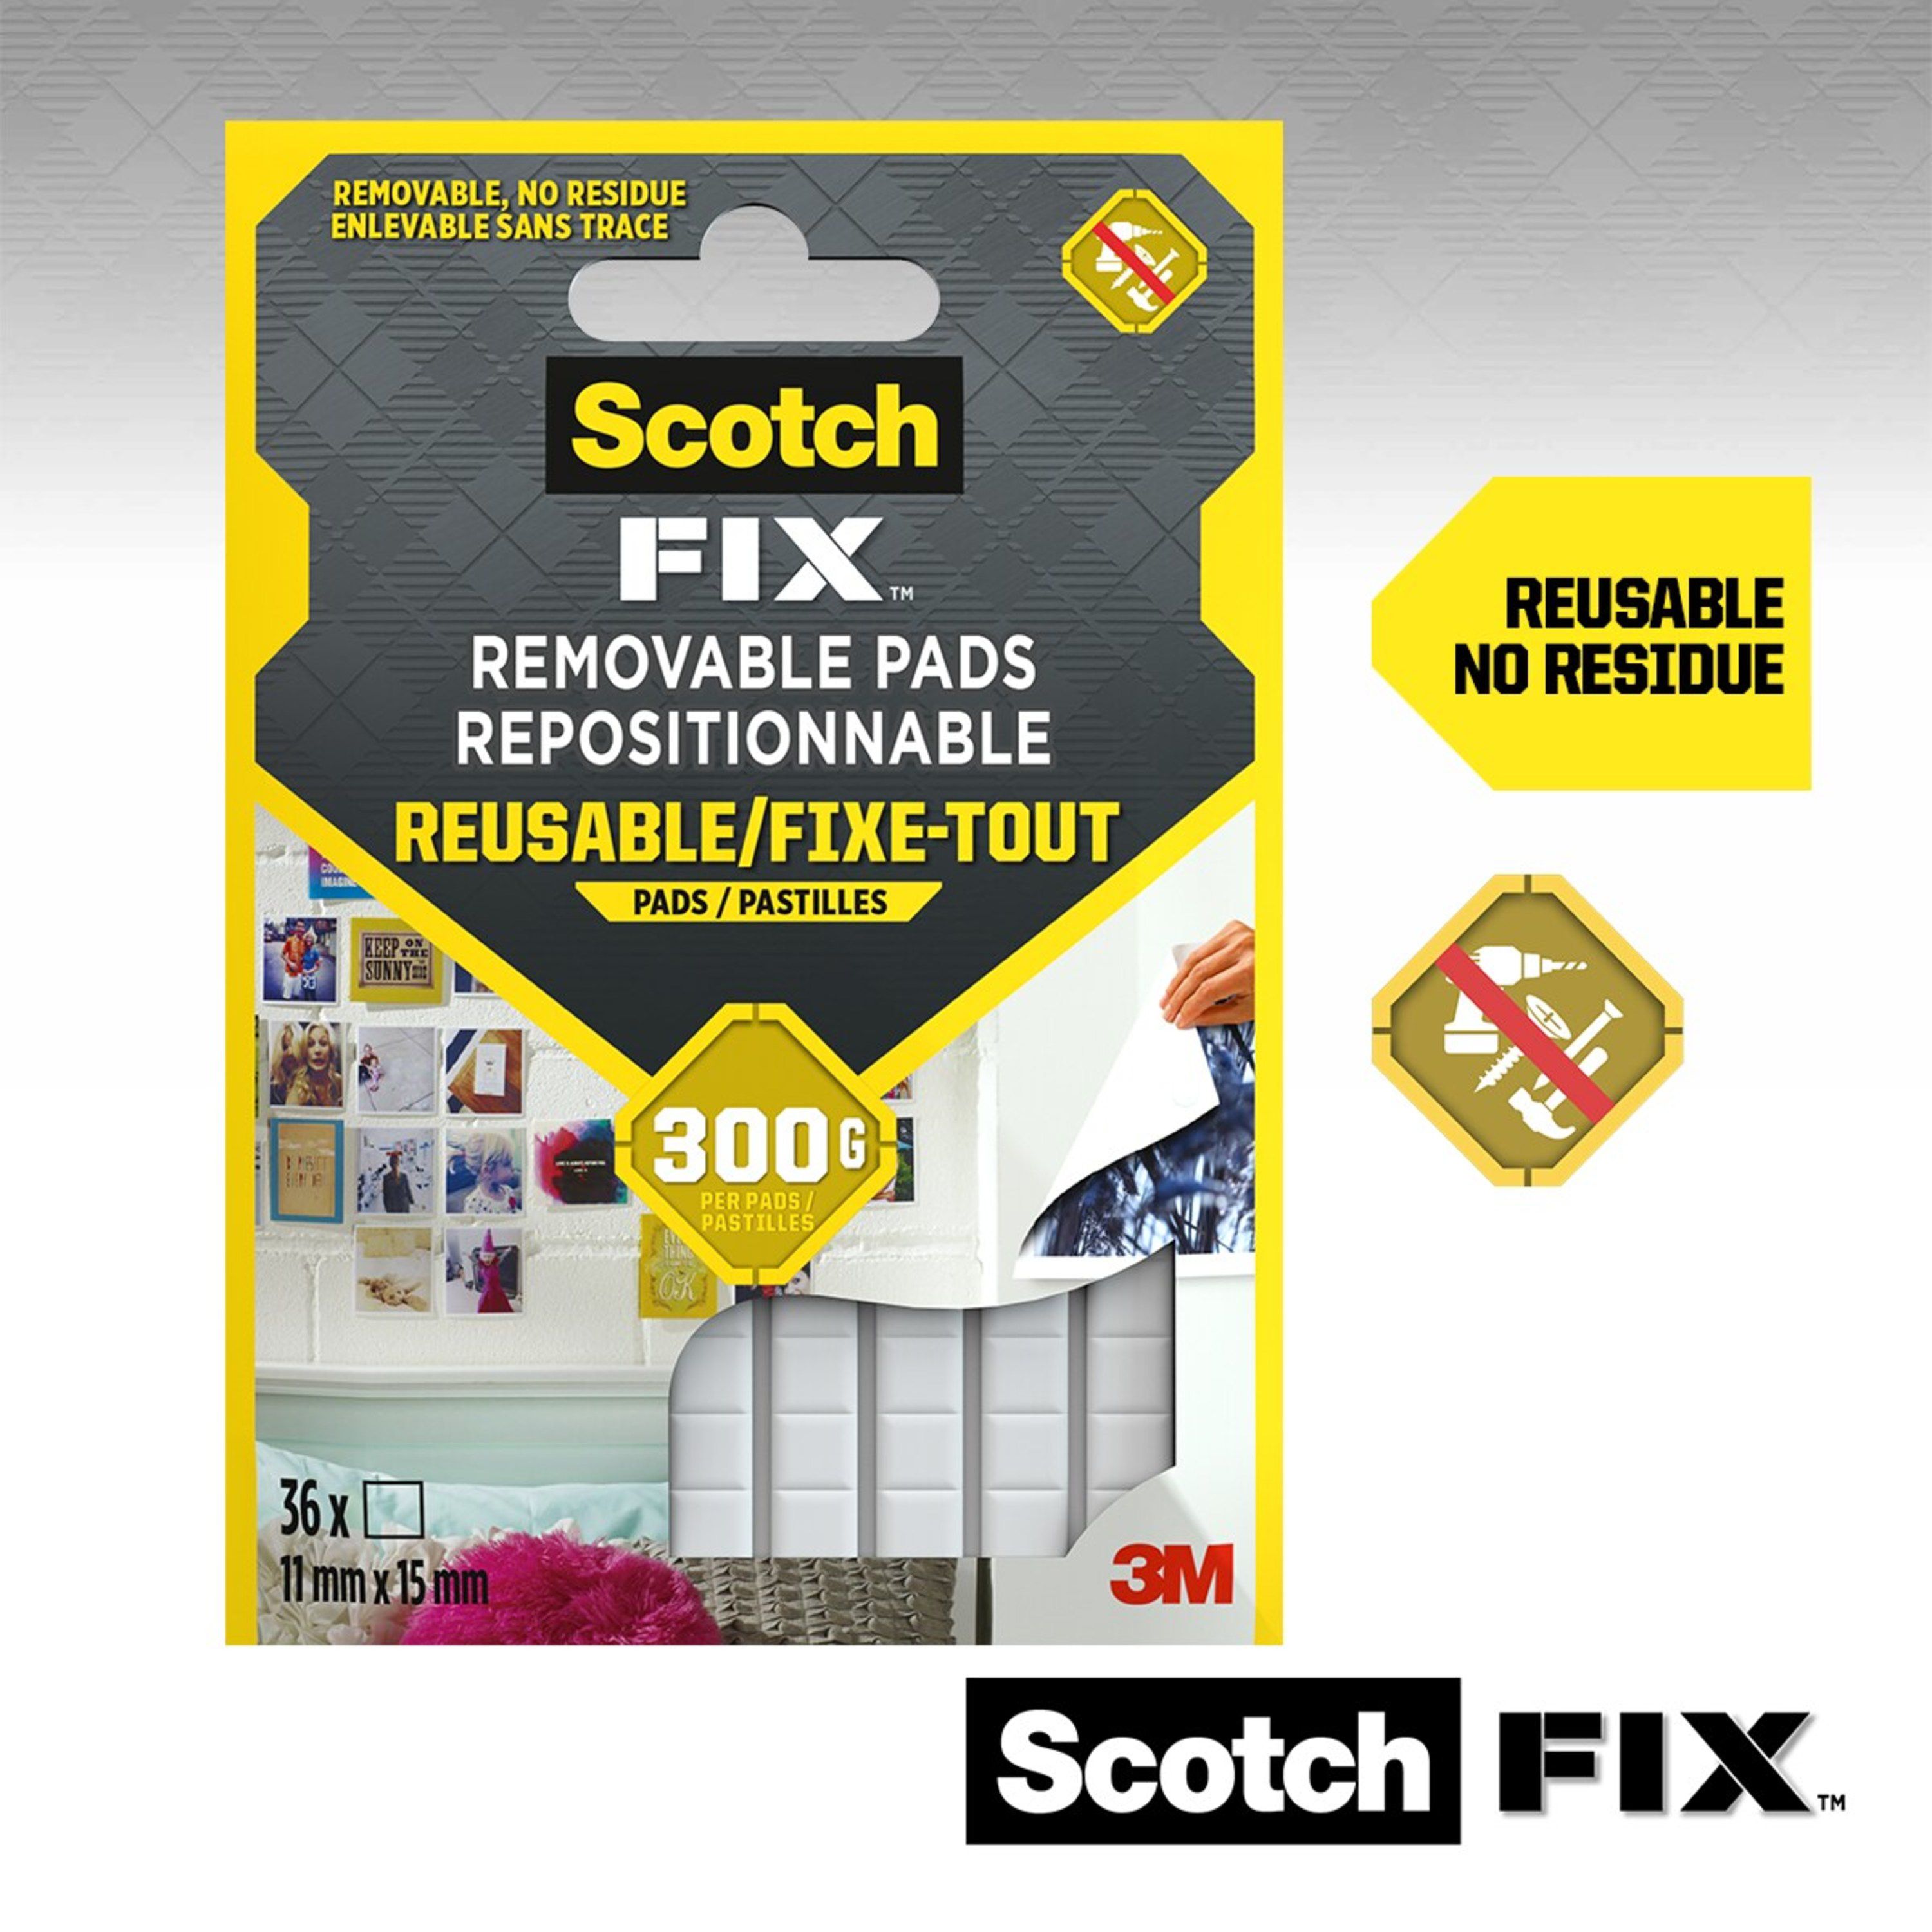 3M Scotch-Fix Removable White Mounting Adhesive pad (L)15mm (W)11mm, Pack of 36